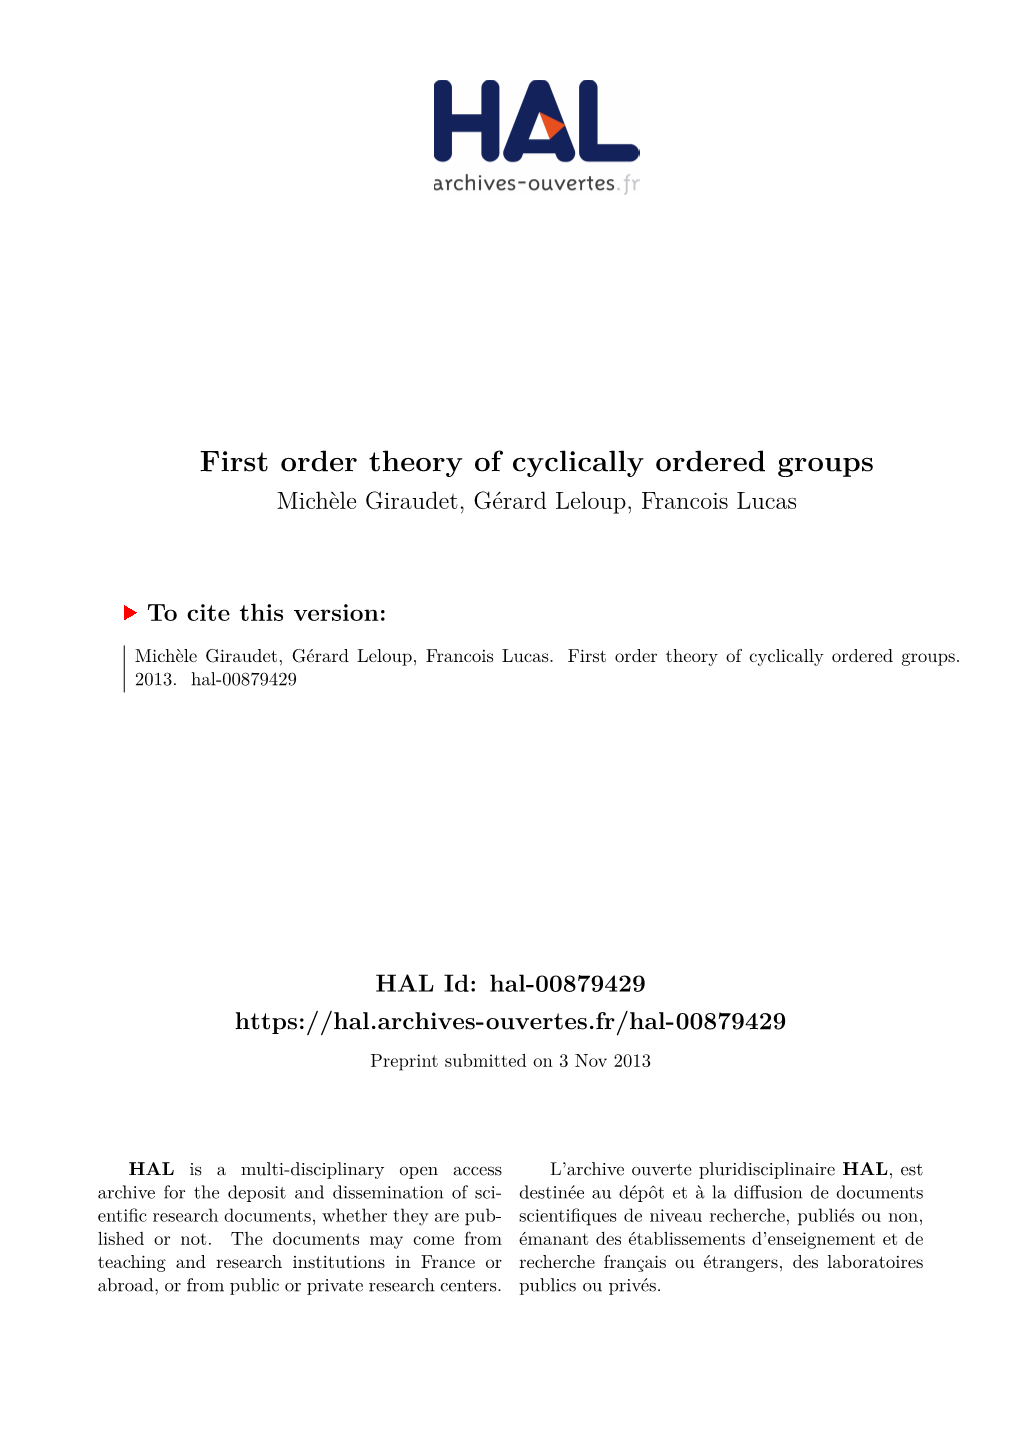 First Order Theory of Cyclically Ordered Groups Michèle Giraudet, Gérard Leloup, Francois Lucas